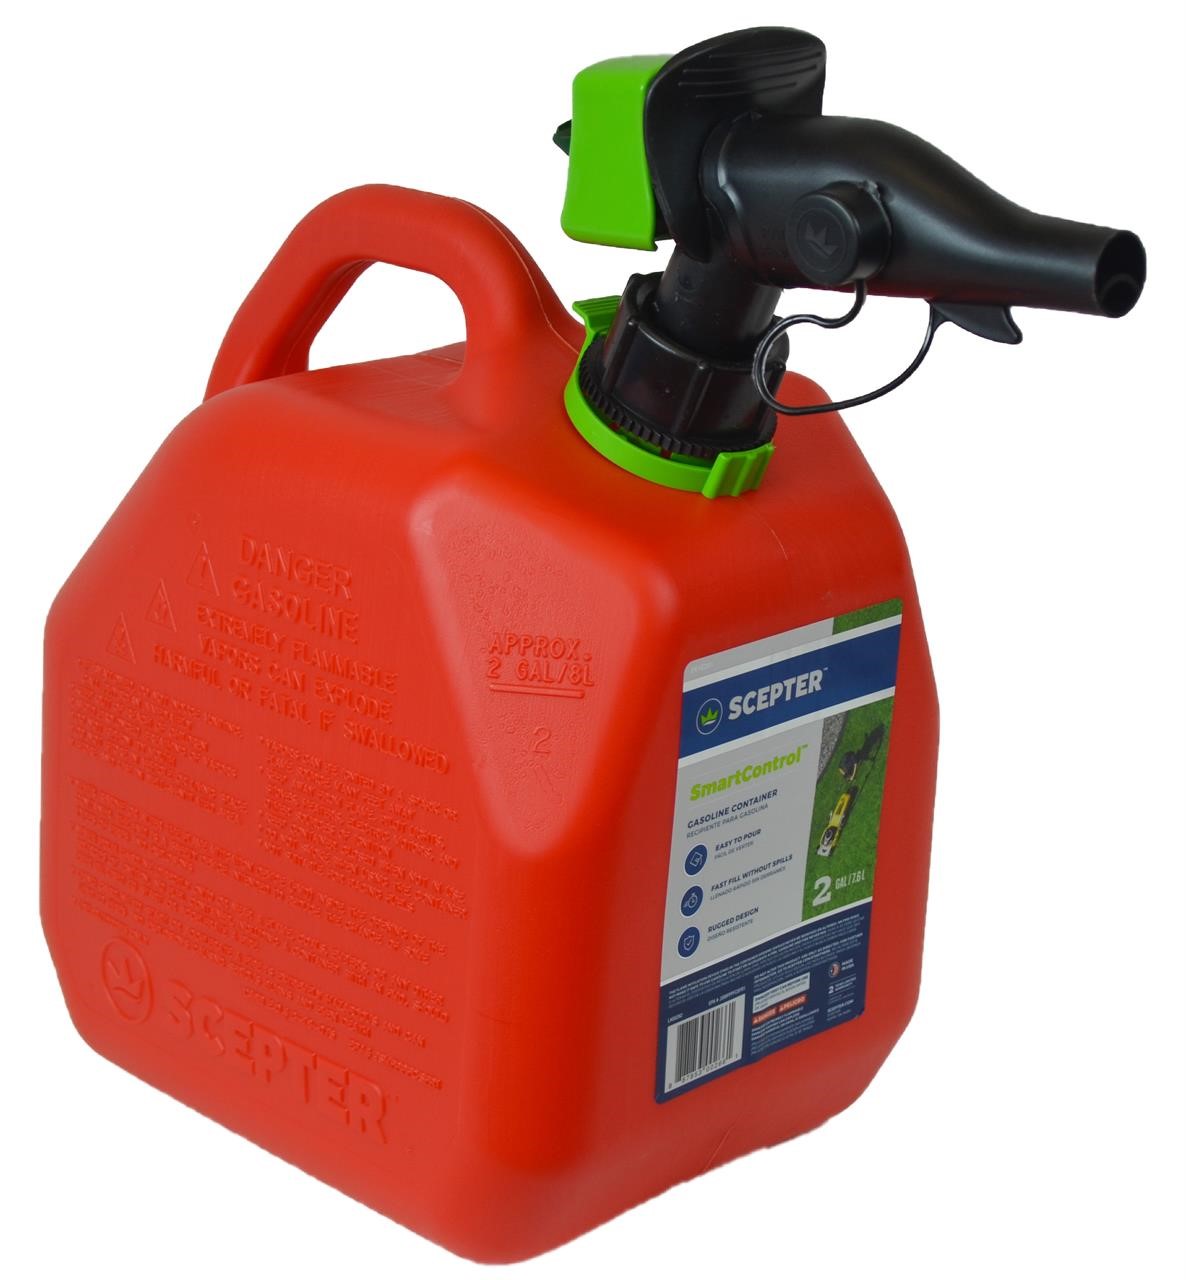 2-Gallon Scepter SmartControl Red Gas Container